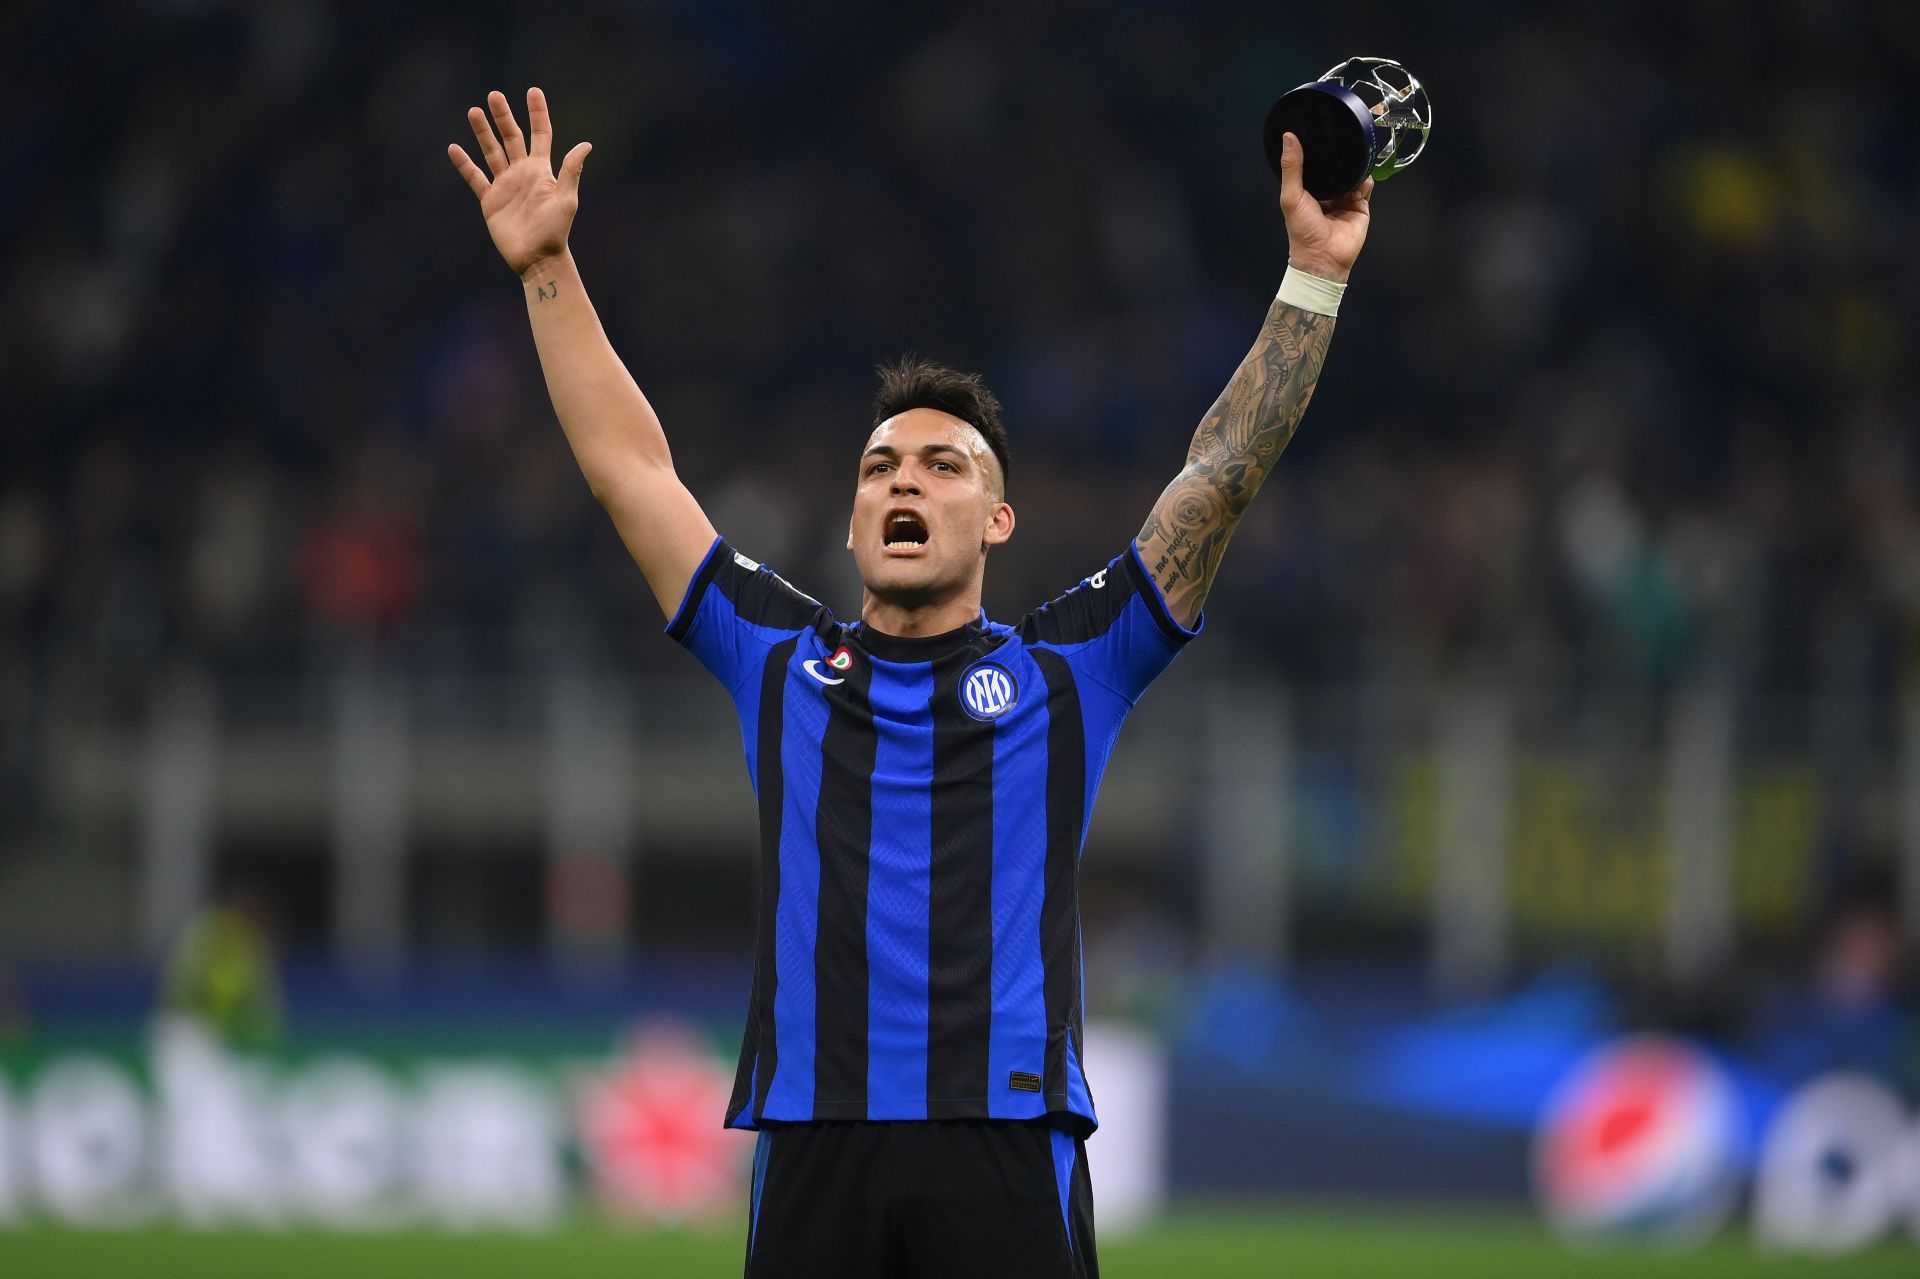 Lautaro Martinez is wanted at Old Trafford.